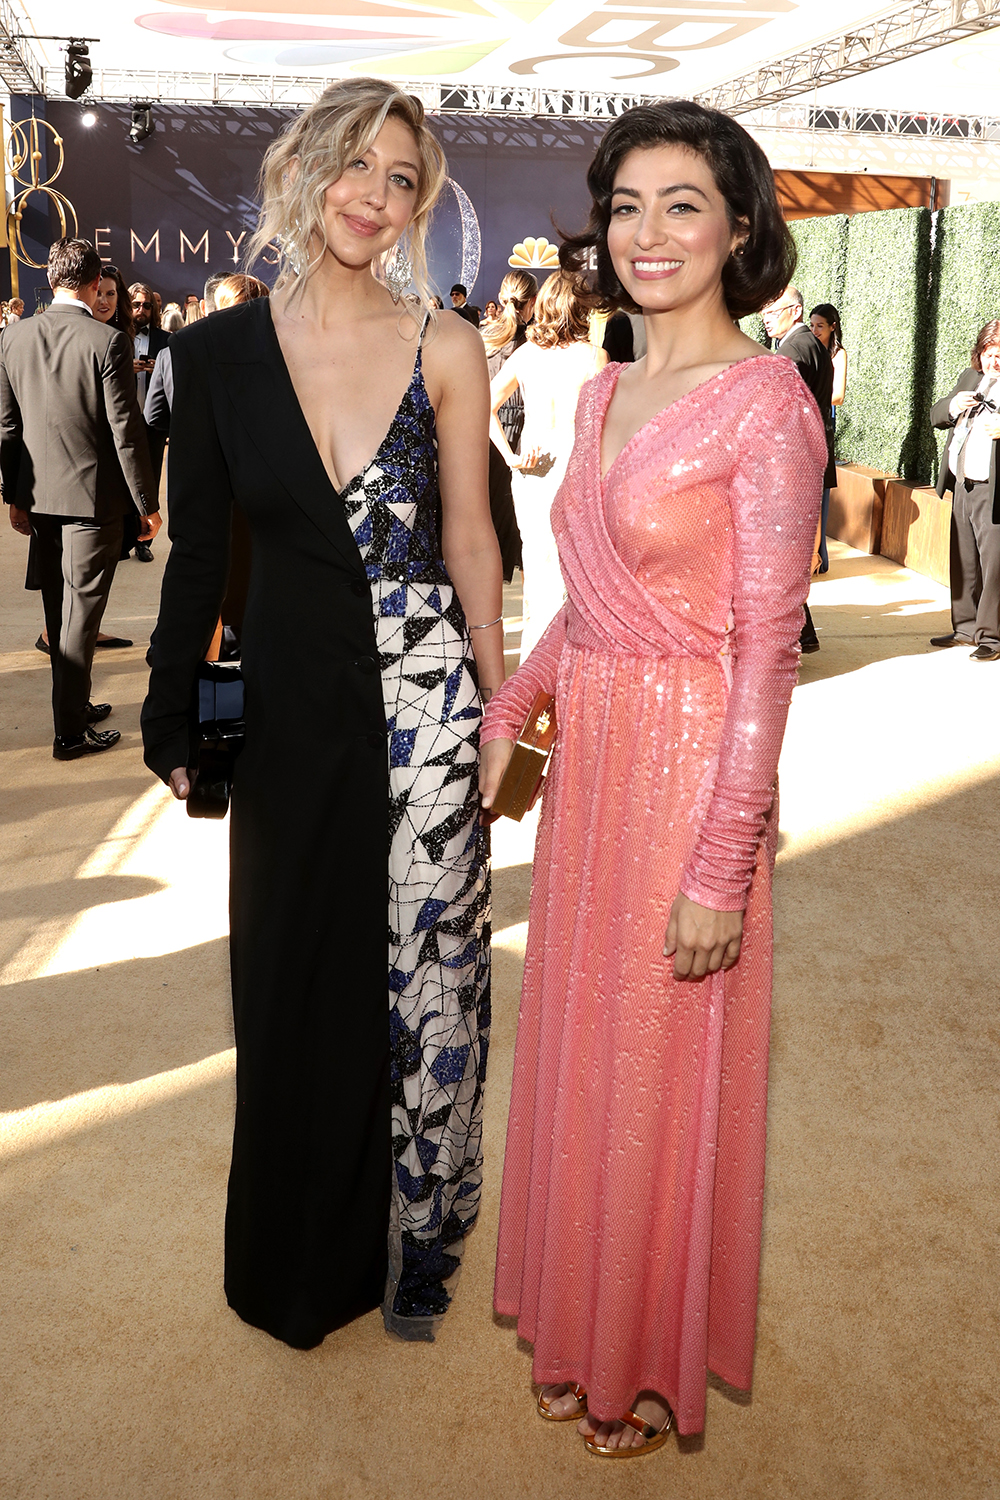 LOS ANGELES, CA - SEPTEMBER 17: 70th ANNUAL PRIMETIME EMMY AWARDS -- Pictured: Heidi Gardner (L) and Melissa Villasenor arrive to the 70th Annual Primetime Emmy Awards held at the Microsoft Theater on September 17, 2018. NUP_184218 (Photo by Todd Williamson/NBC/NBCU Photo Bank via Getty Images)